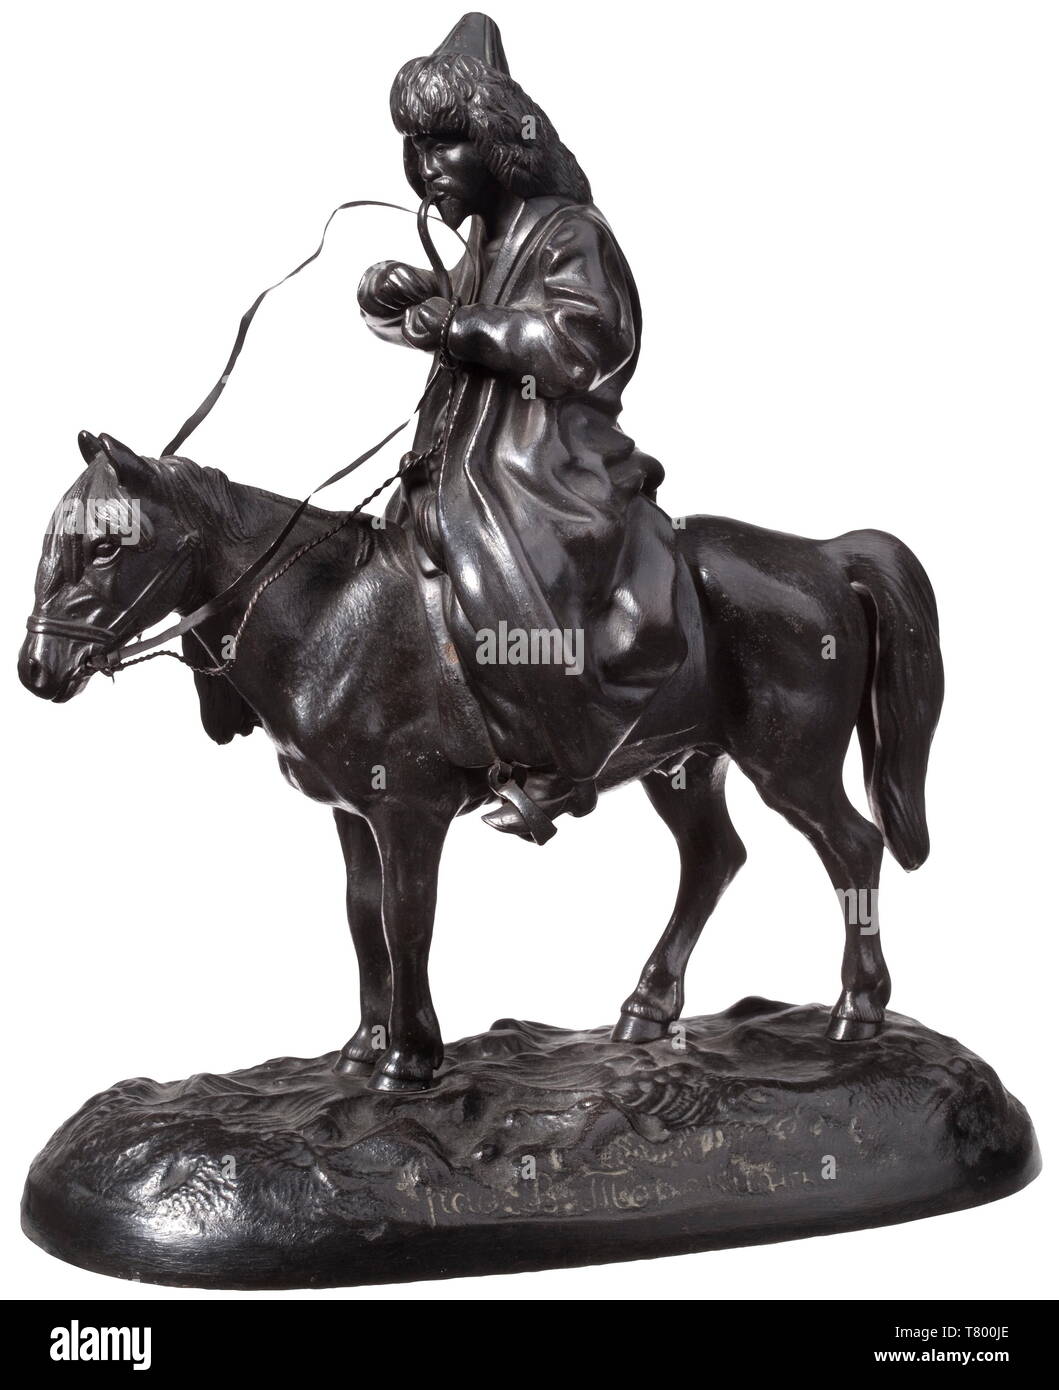 An iron sculpture - a Kyrgyz on horseback Vasily Fedorovich Torokin (1845 - 1912). A Kyrgyz on horseback, stuffing a pipe. Mounted on an oval base plate signed in Cyrillic on the side, and with the caster's stamp 'A.L. Ober' and the tsarist double-headed eagle on the bottom. 19 x 22 cm historic, historical, 19th century, Additional-Rights-Clearance-Info-Not-Available Stock Photo